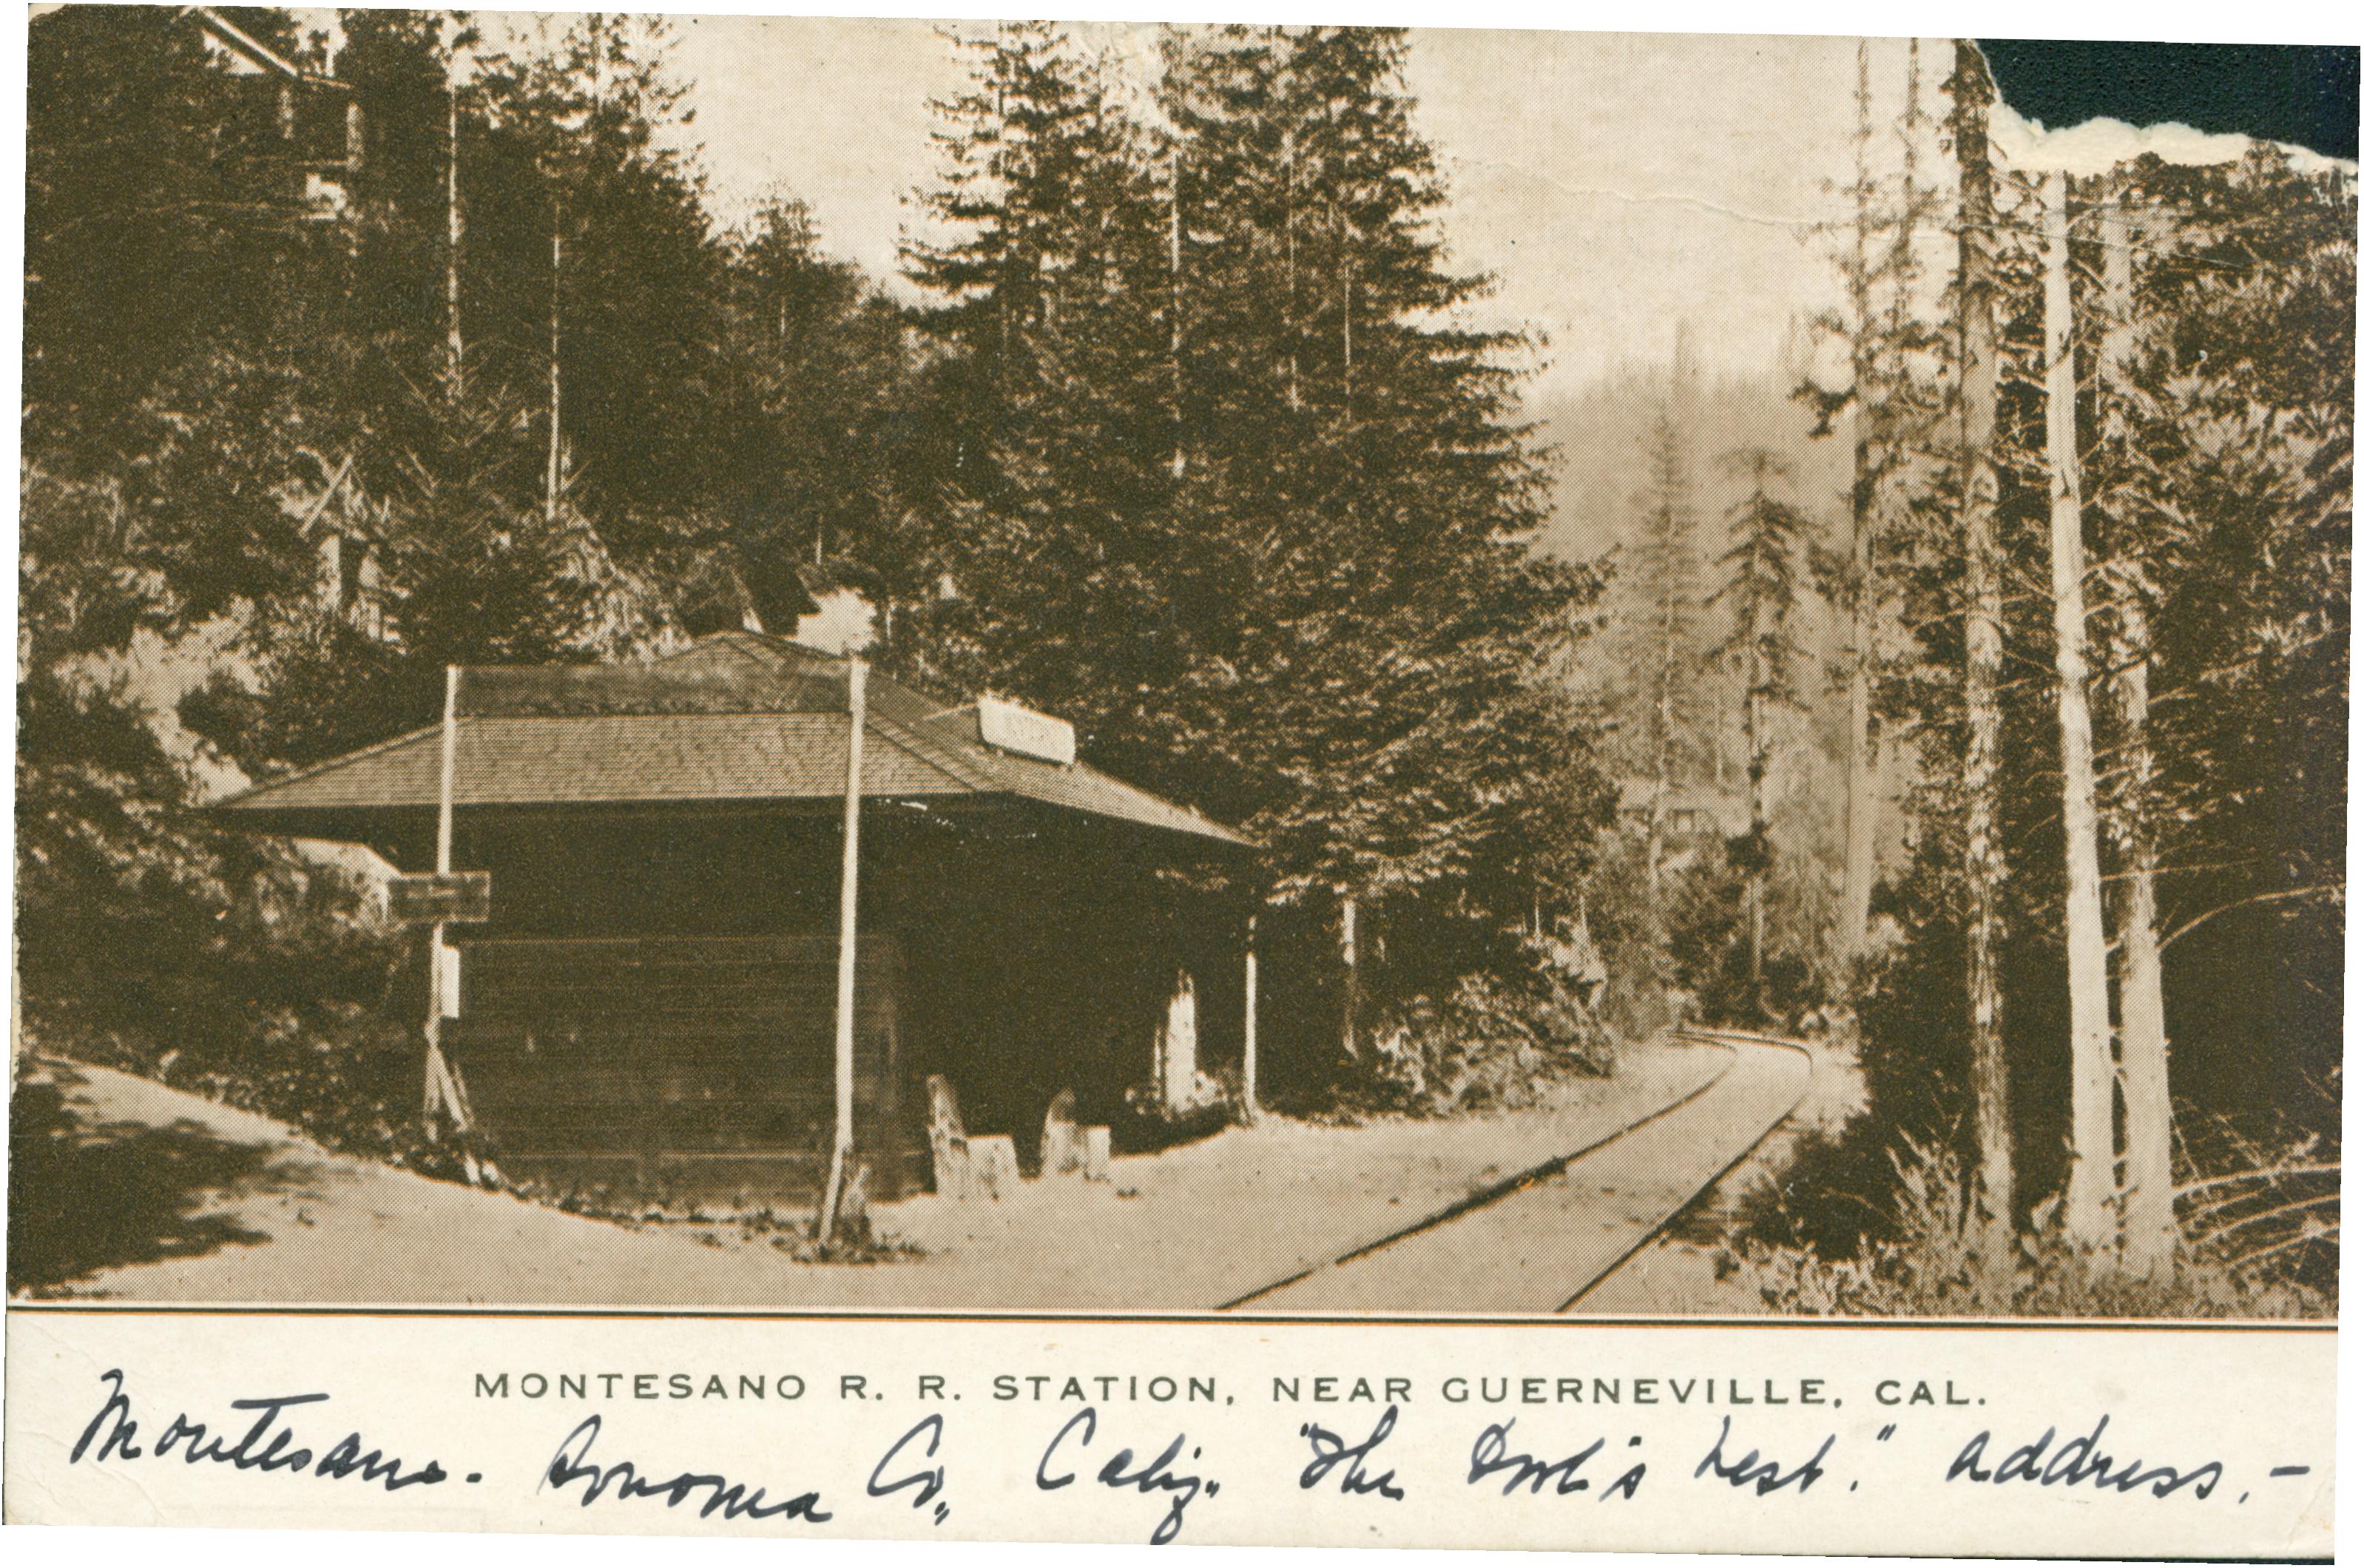 Shows a railroad depot by railroad tracks winding through the trees.